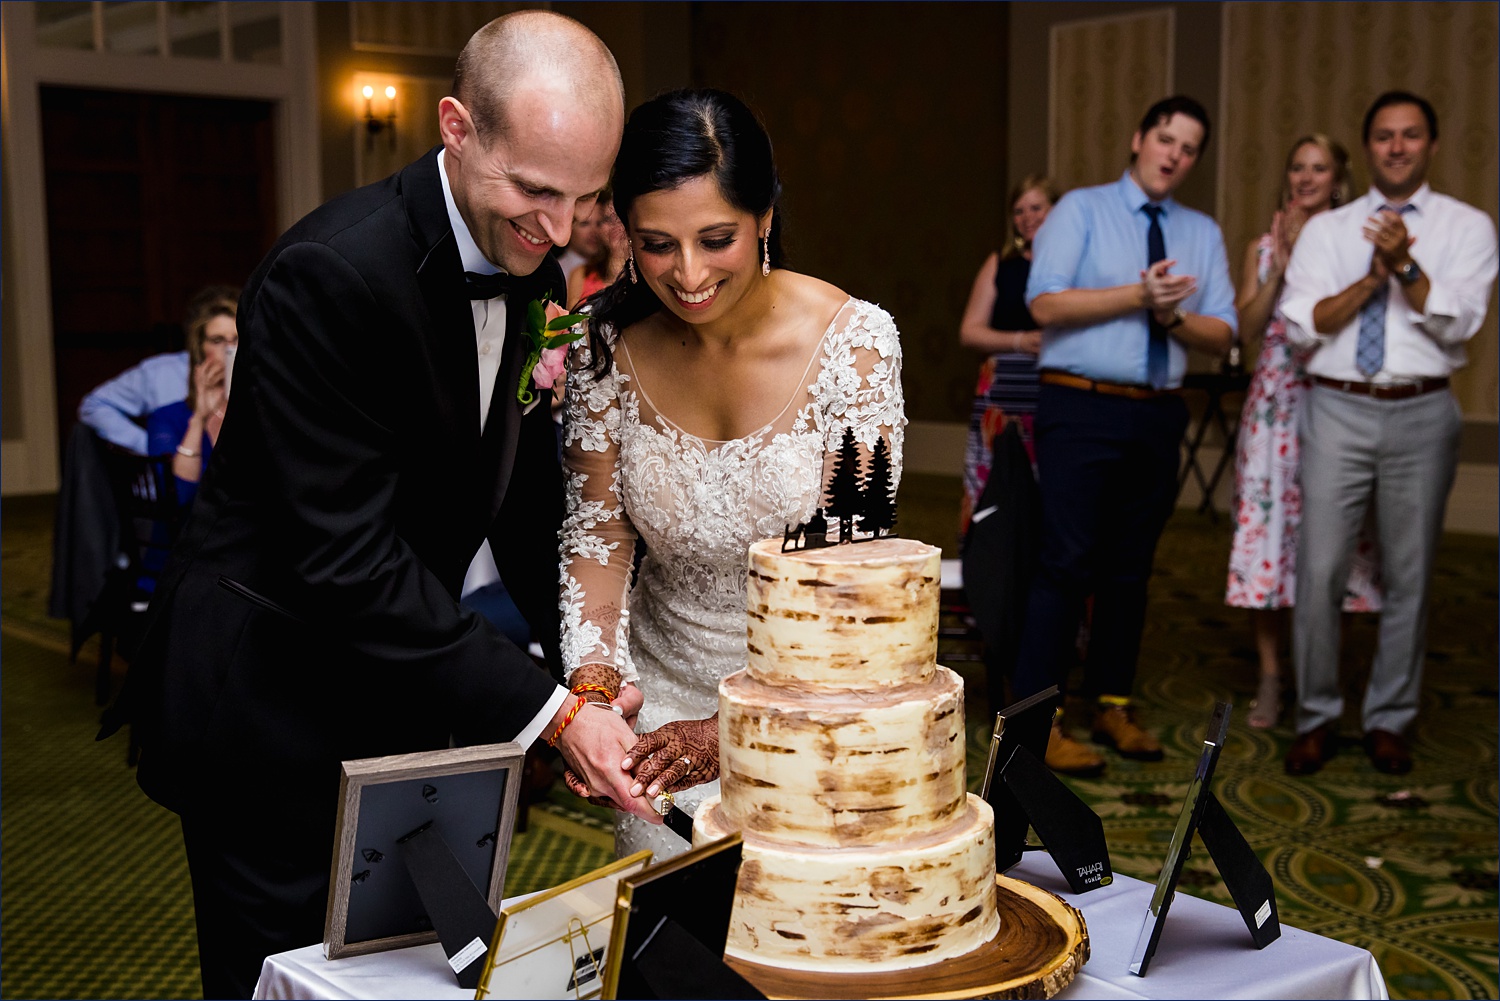 The bride and groom cut their wedding cake while family cheers them on